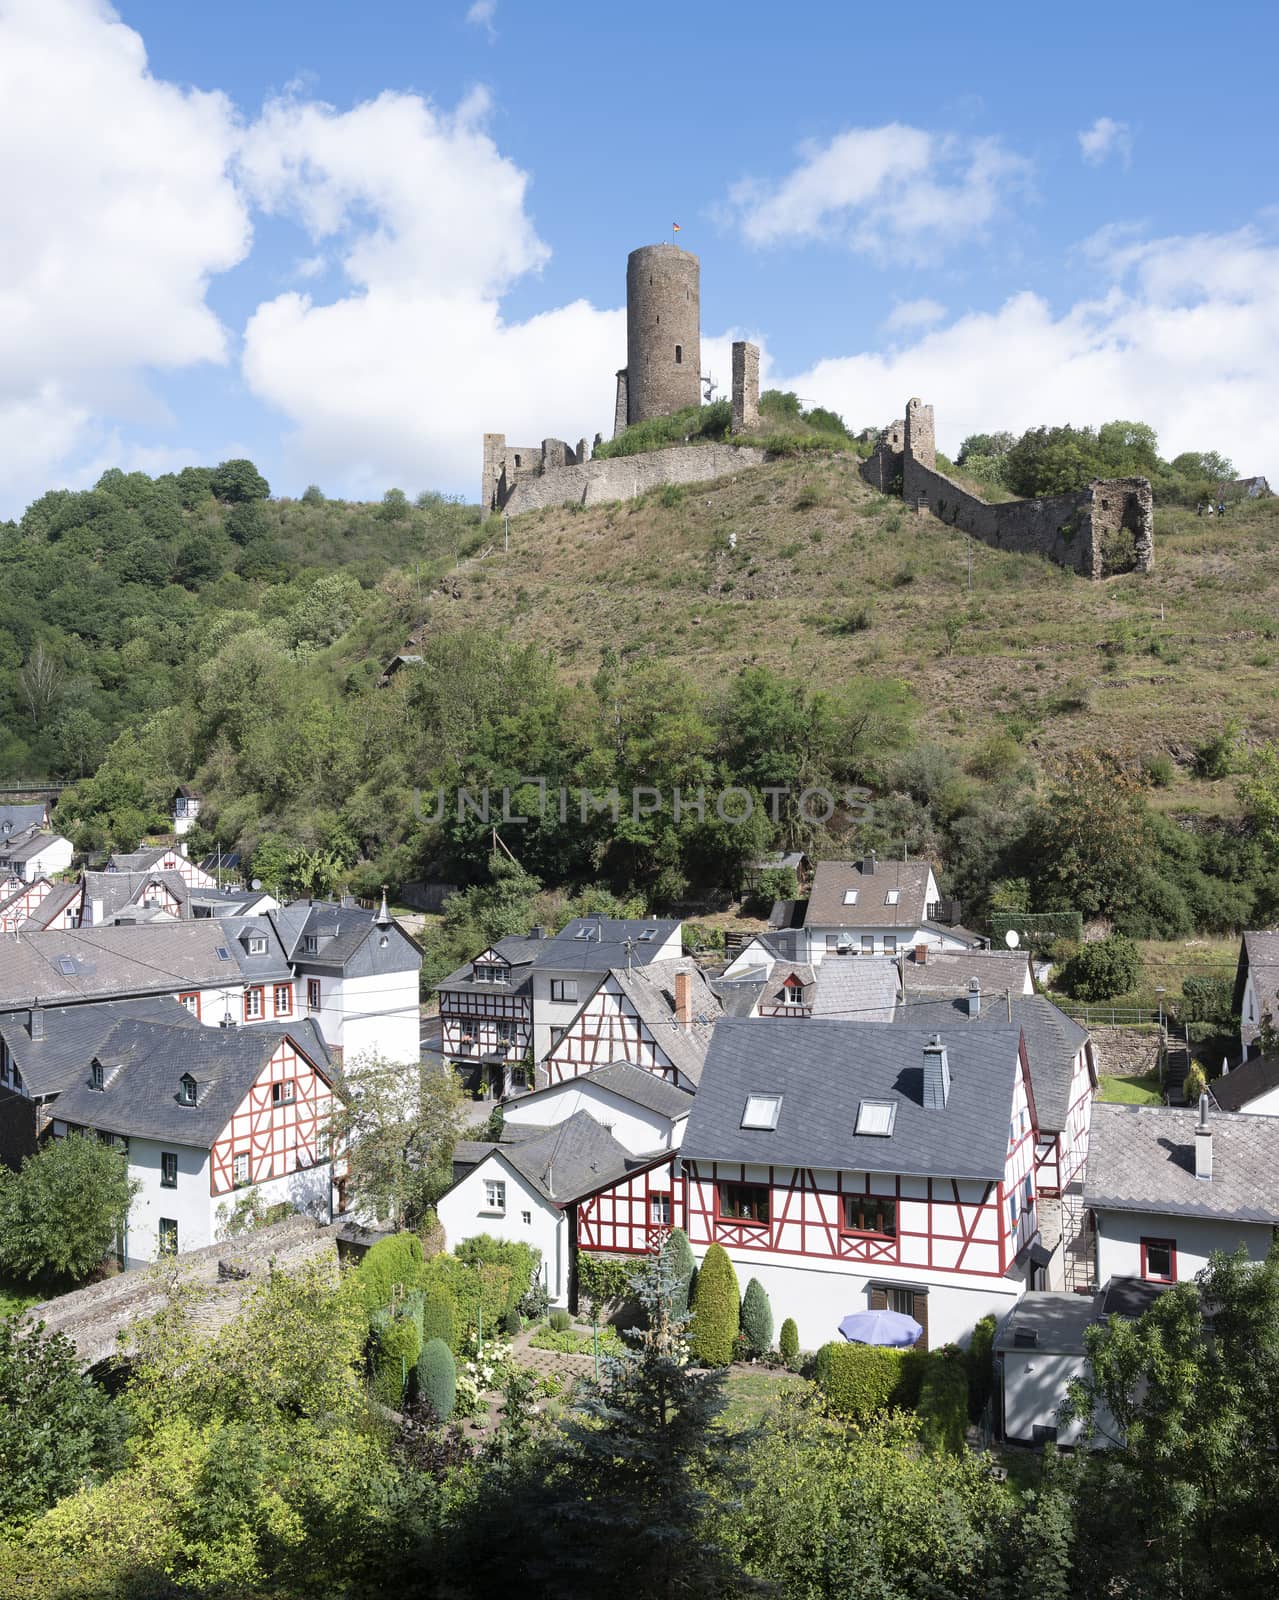 half timbered houses and castle ruin in beautiful village of Monreal in german eifel unbder blue sky